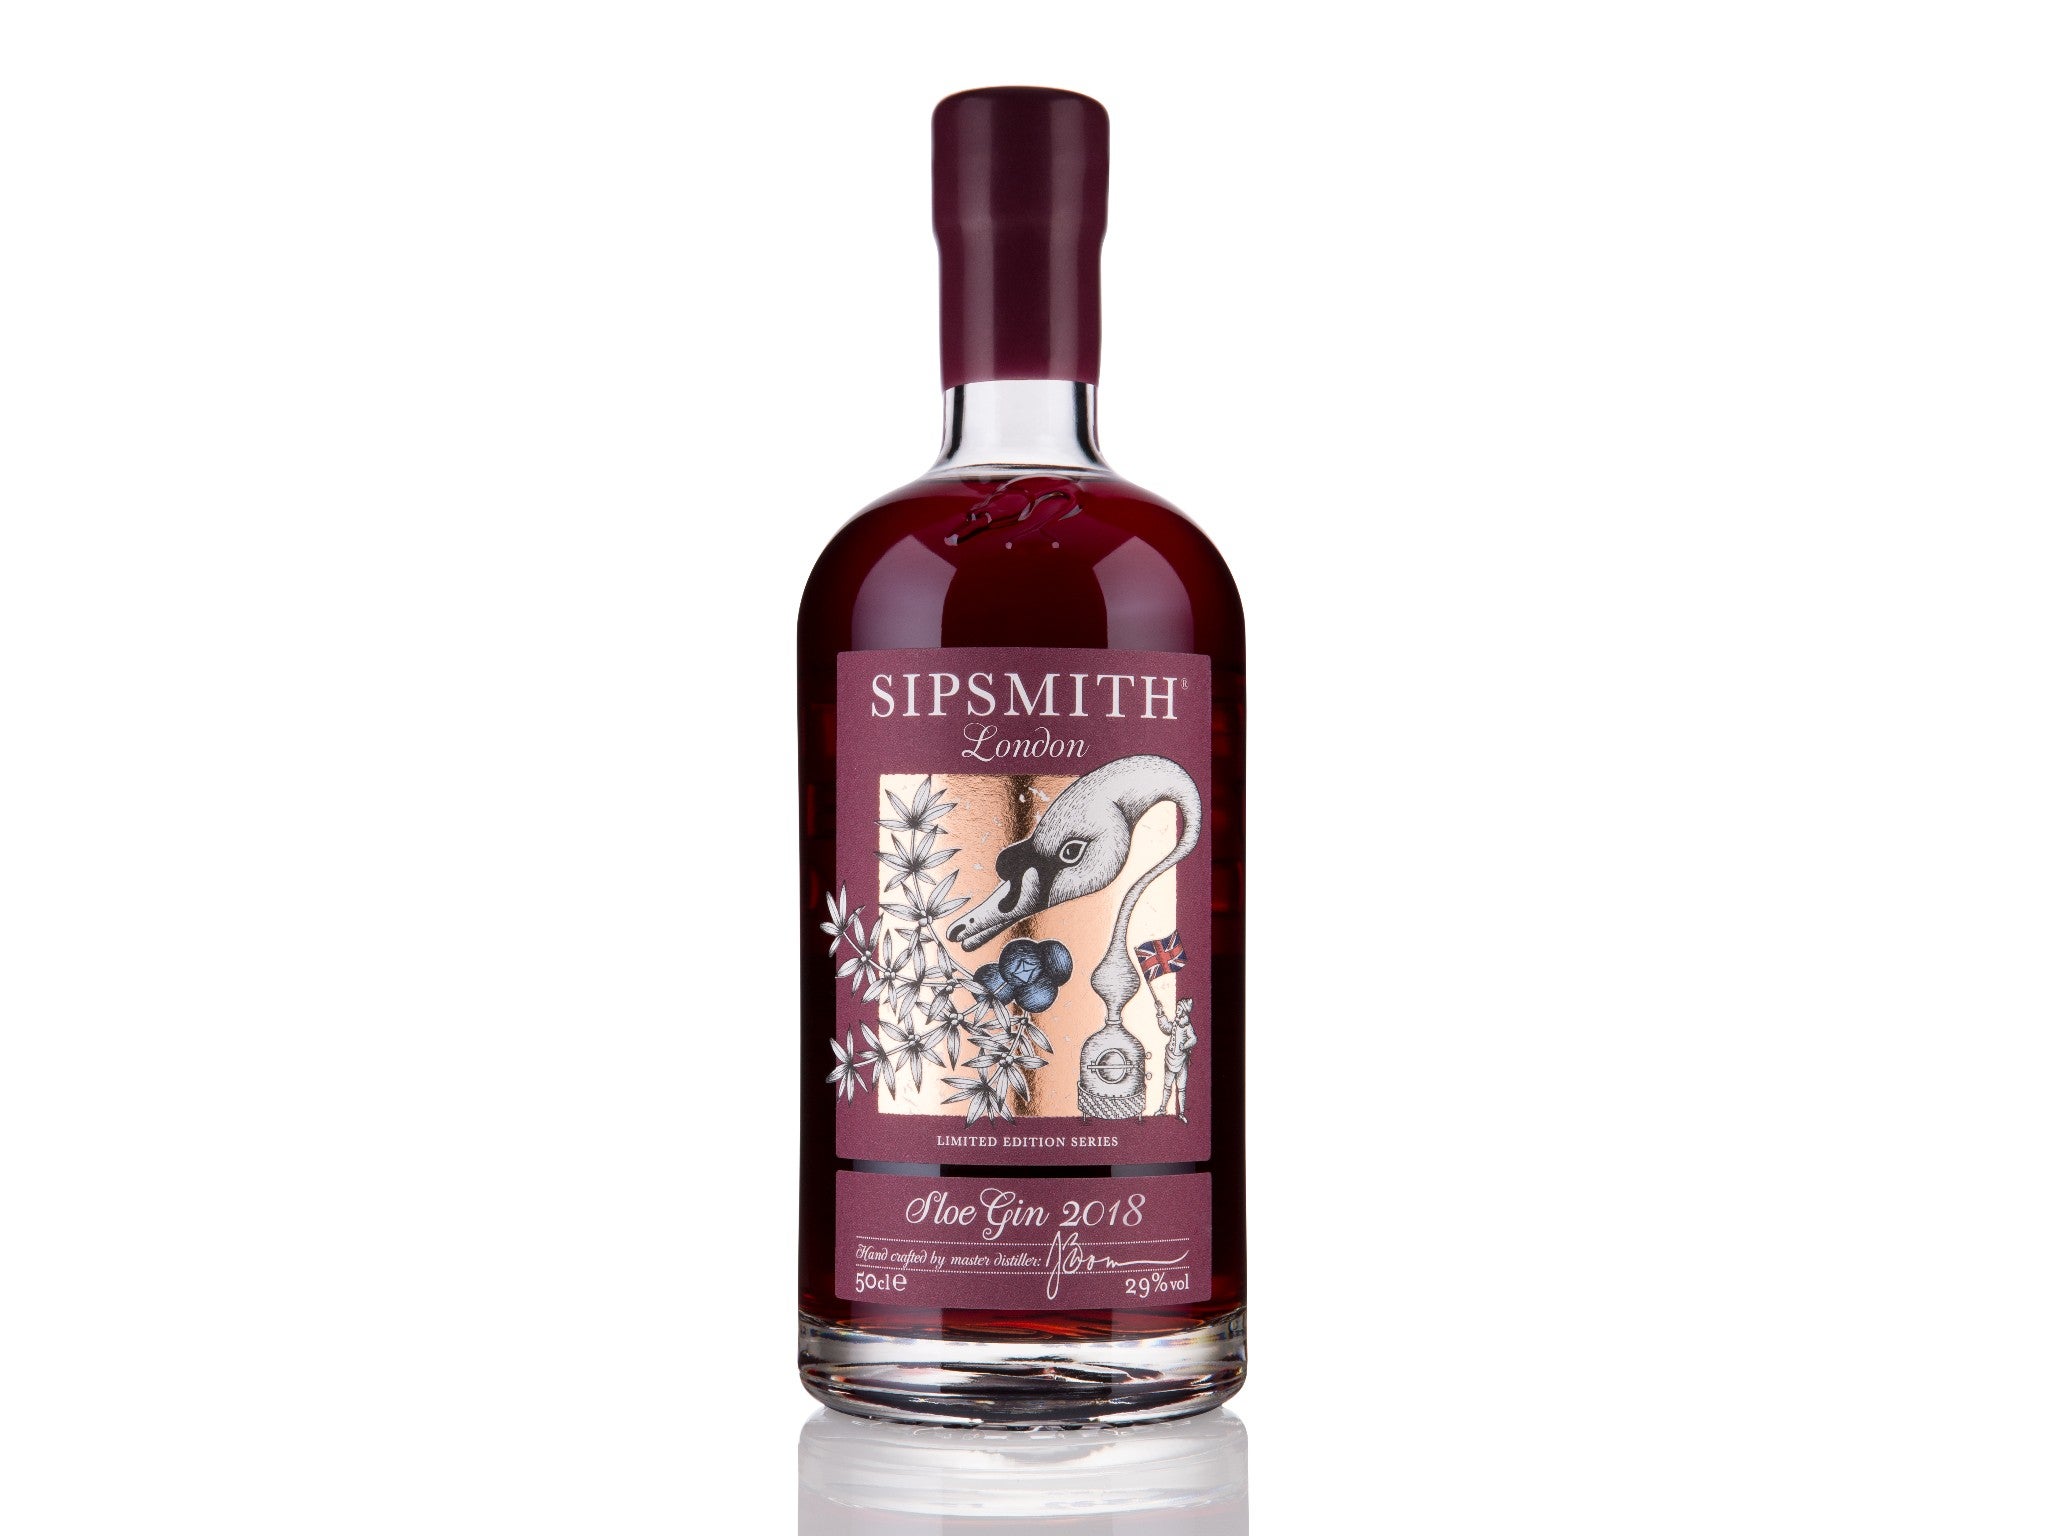 Sipsmith sloe gin 2018, 50cl indybest.jpeg